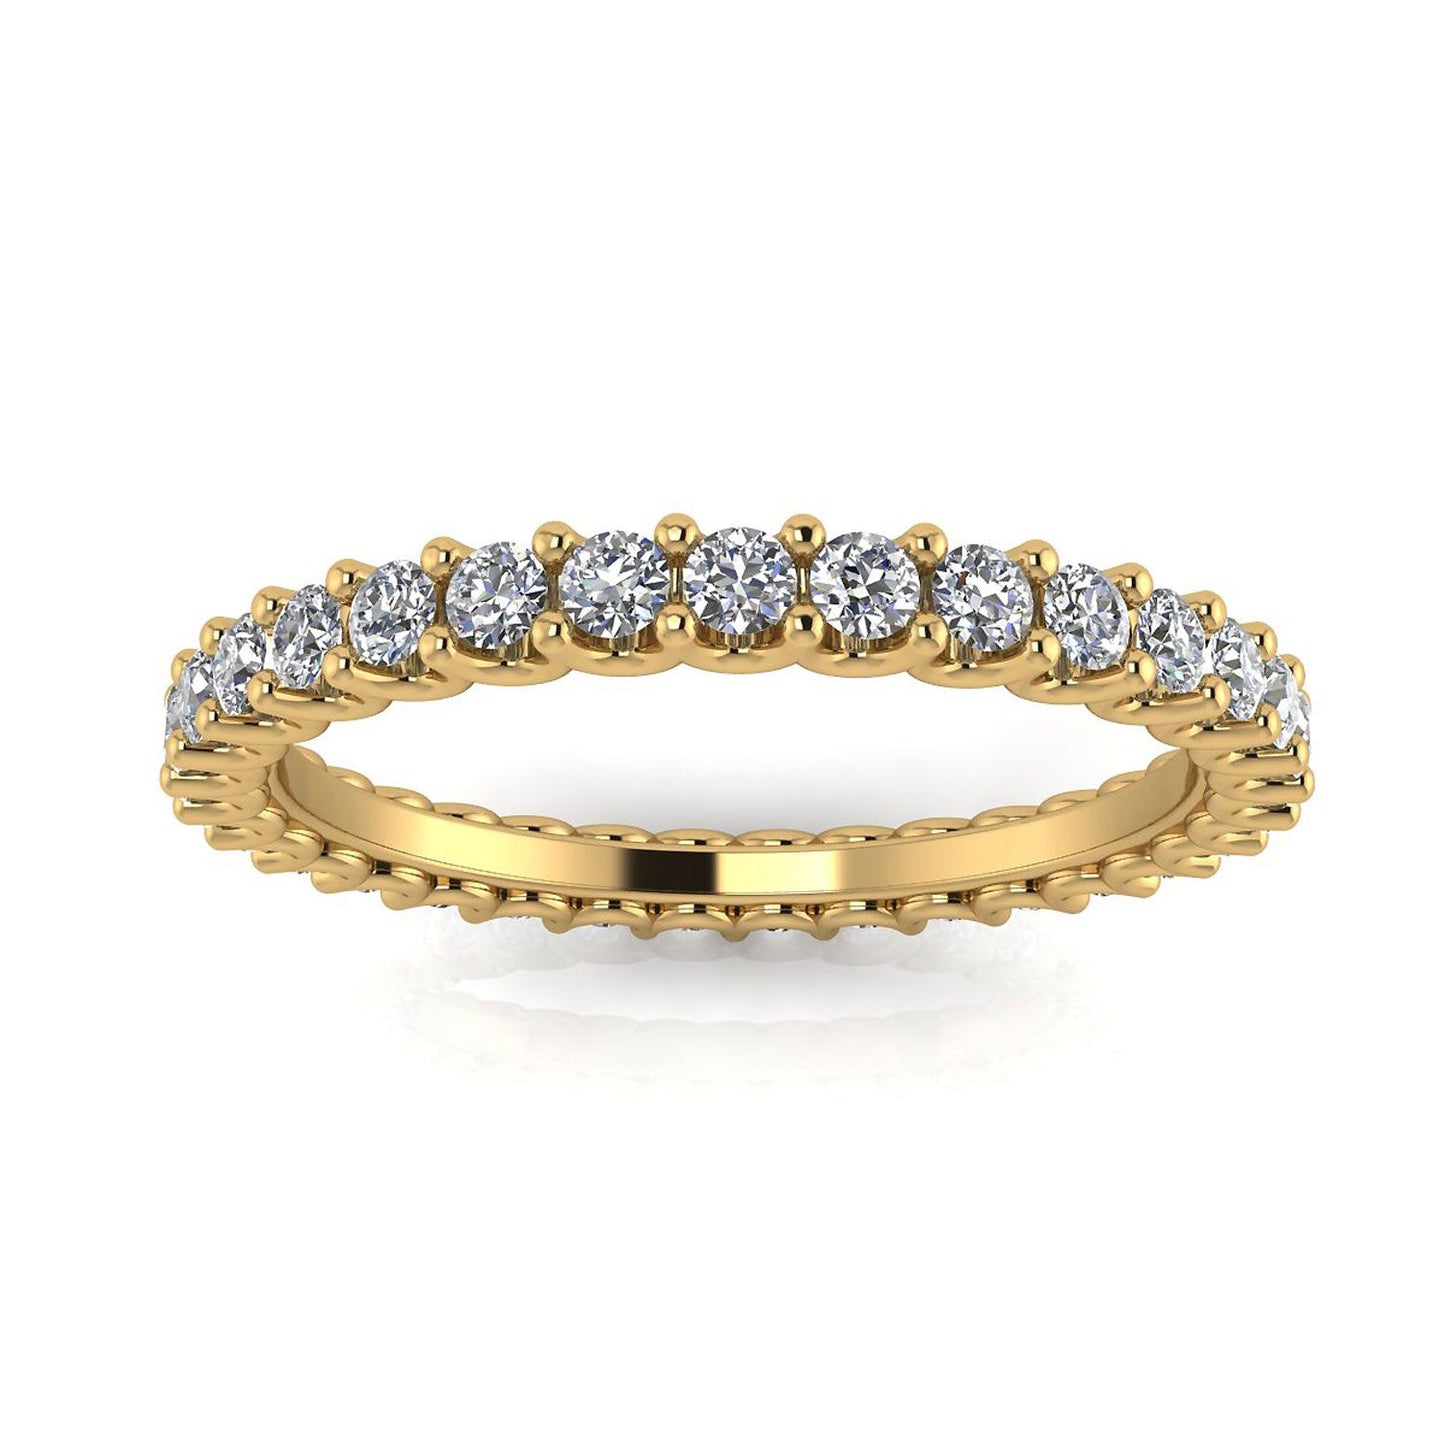 Round Brilliant Cut Diamond Shared Prong Set Eternity Ring In 14k Yellow Gold  (1.43ct. Tw.) Ring Size 5.5